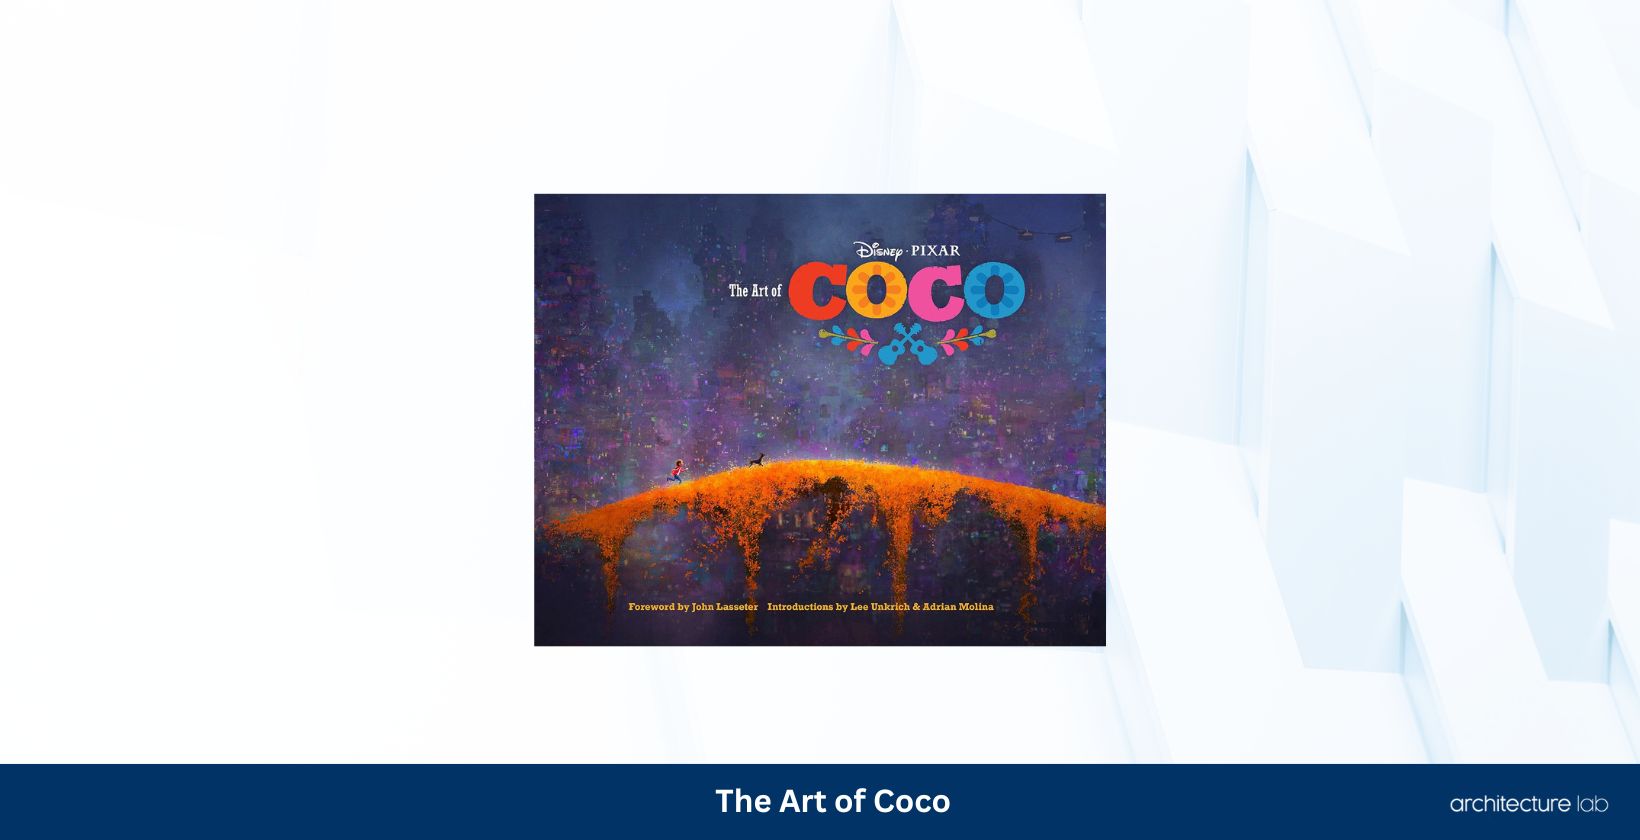 The art of coco